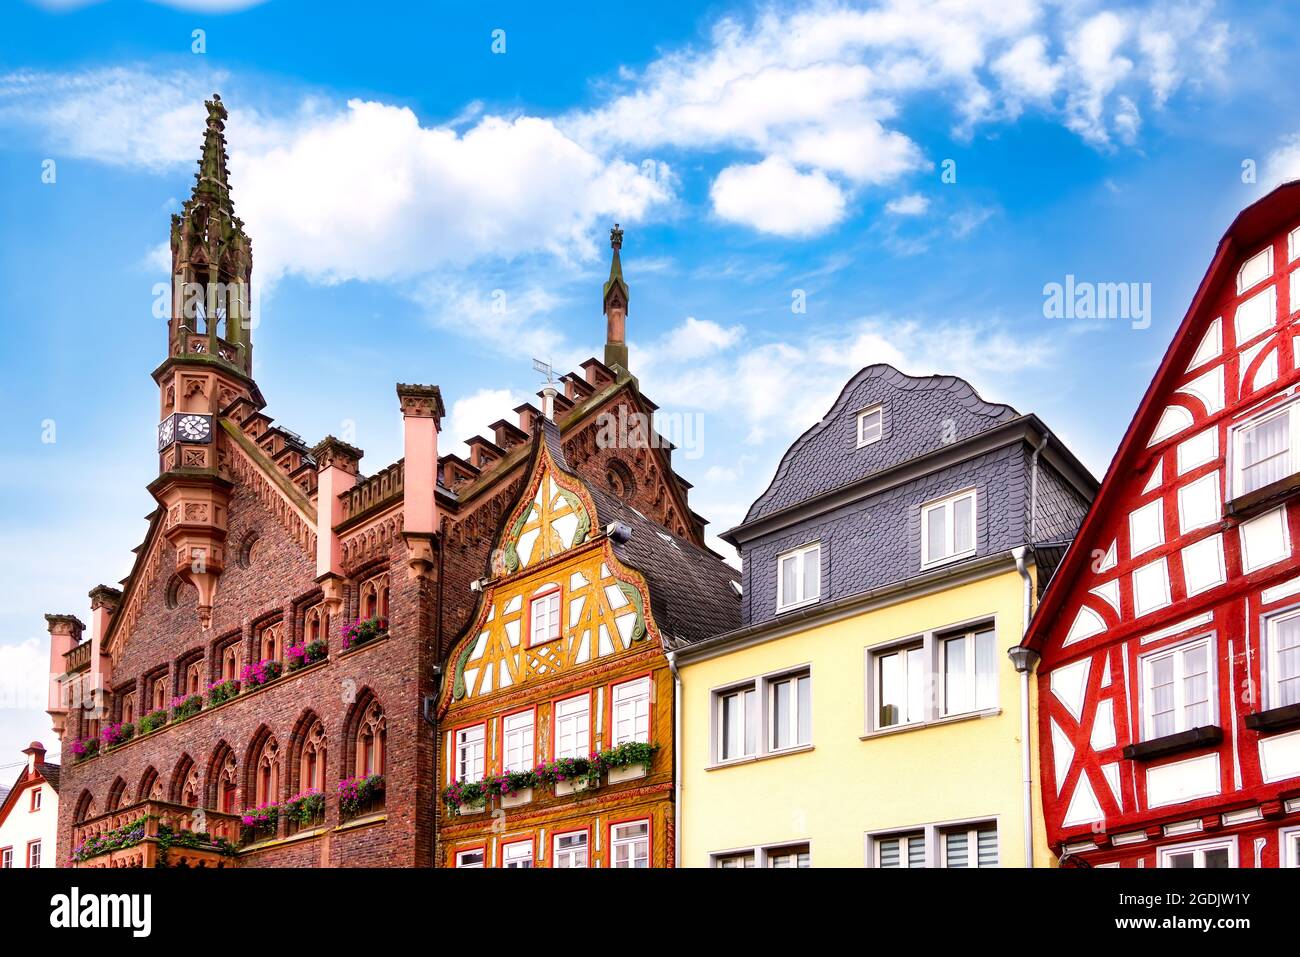 View to the old town hall and half-timbered houses in the old town of Montabaur, Germany Stock Photo